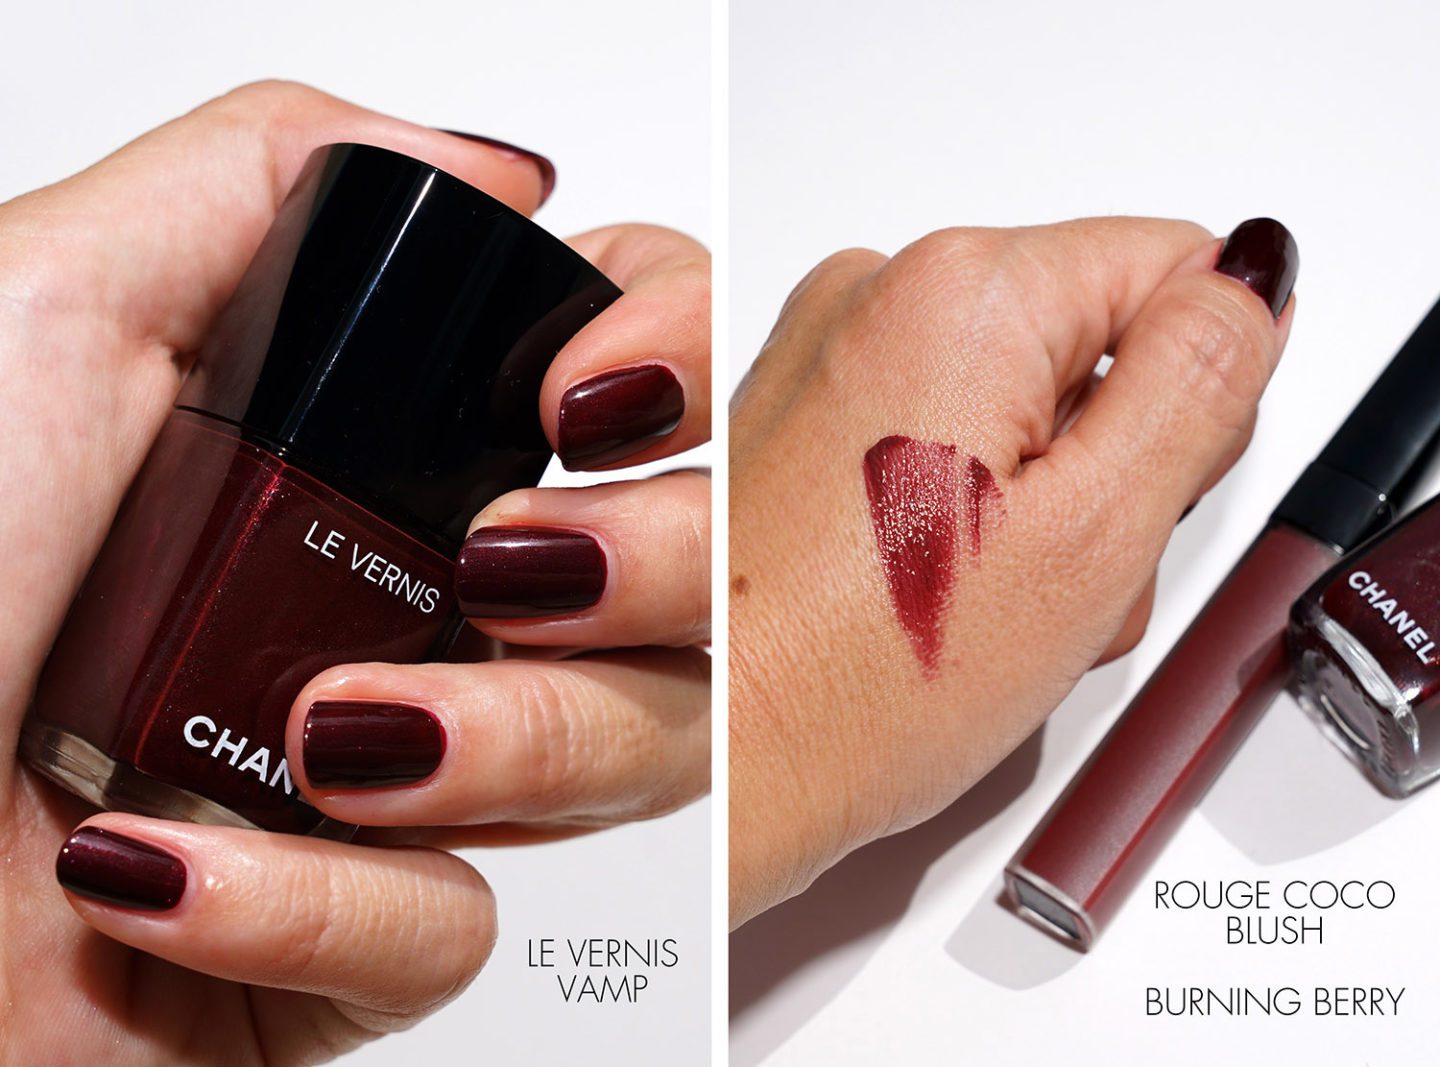 Chanel Le Vernis Vamp and Rouge Coco Blush in Burning Berry